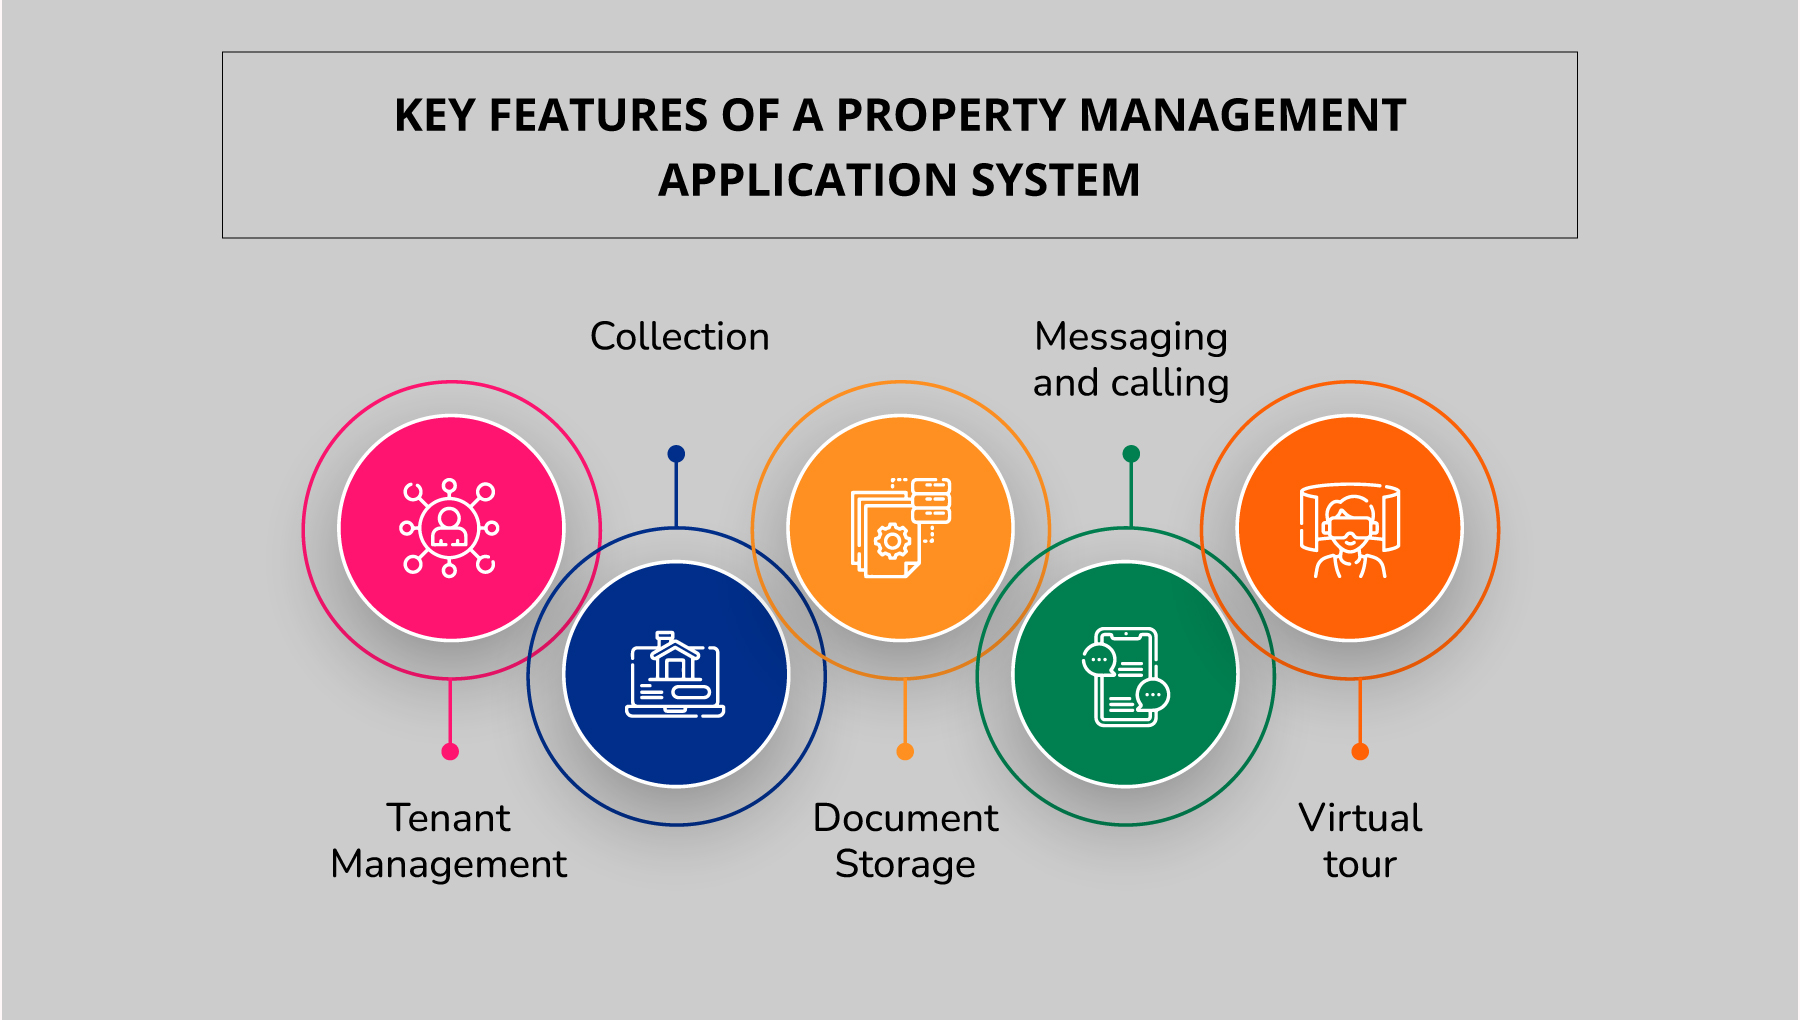 Key features of a Property Management Application System